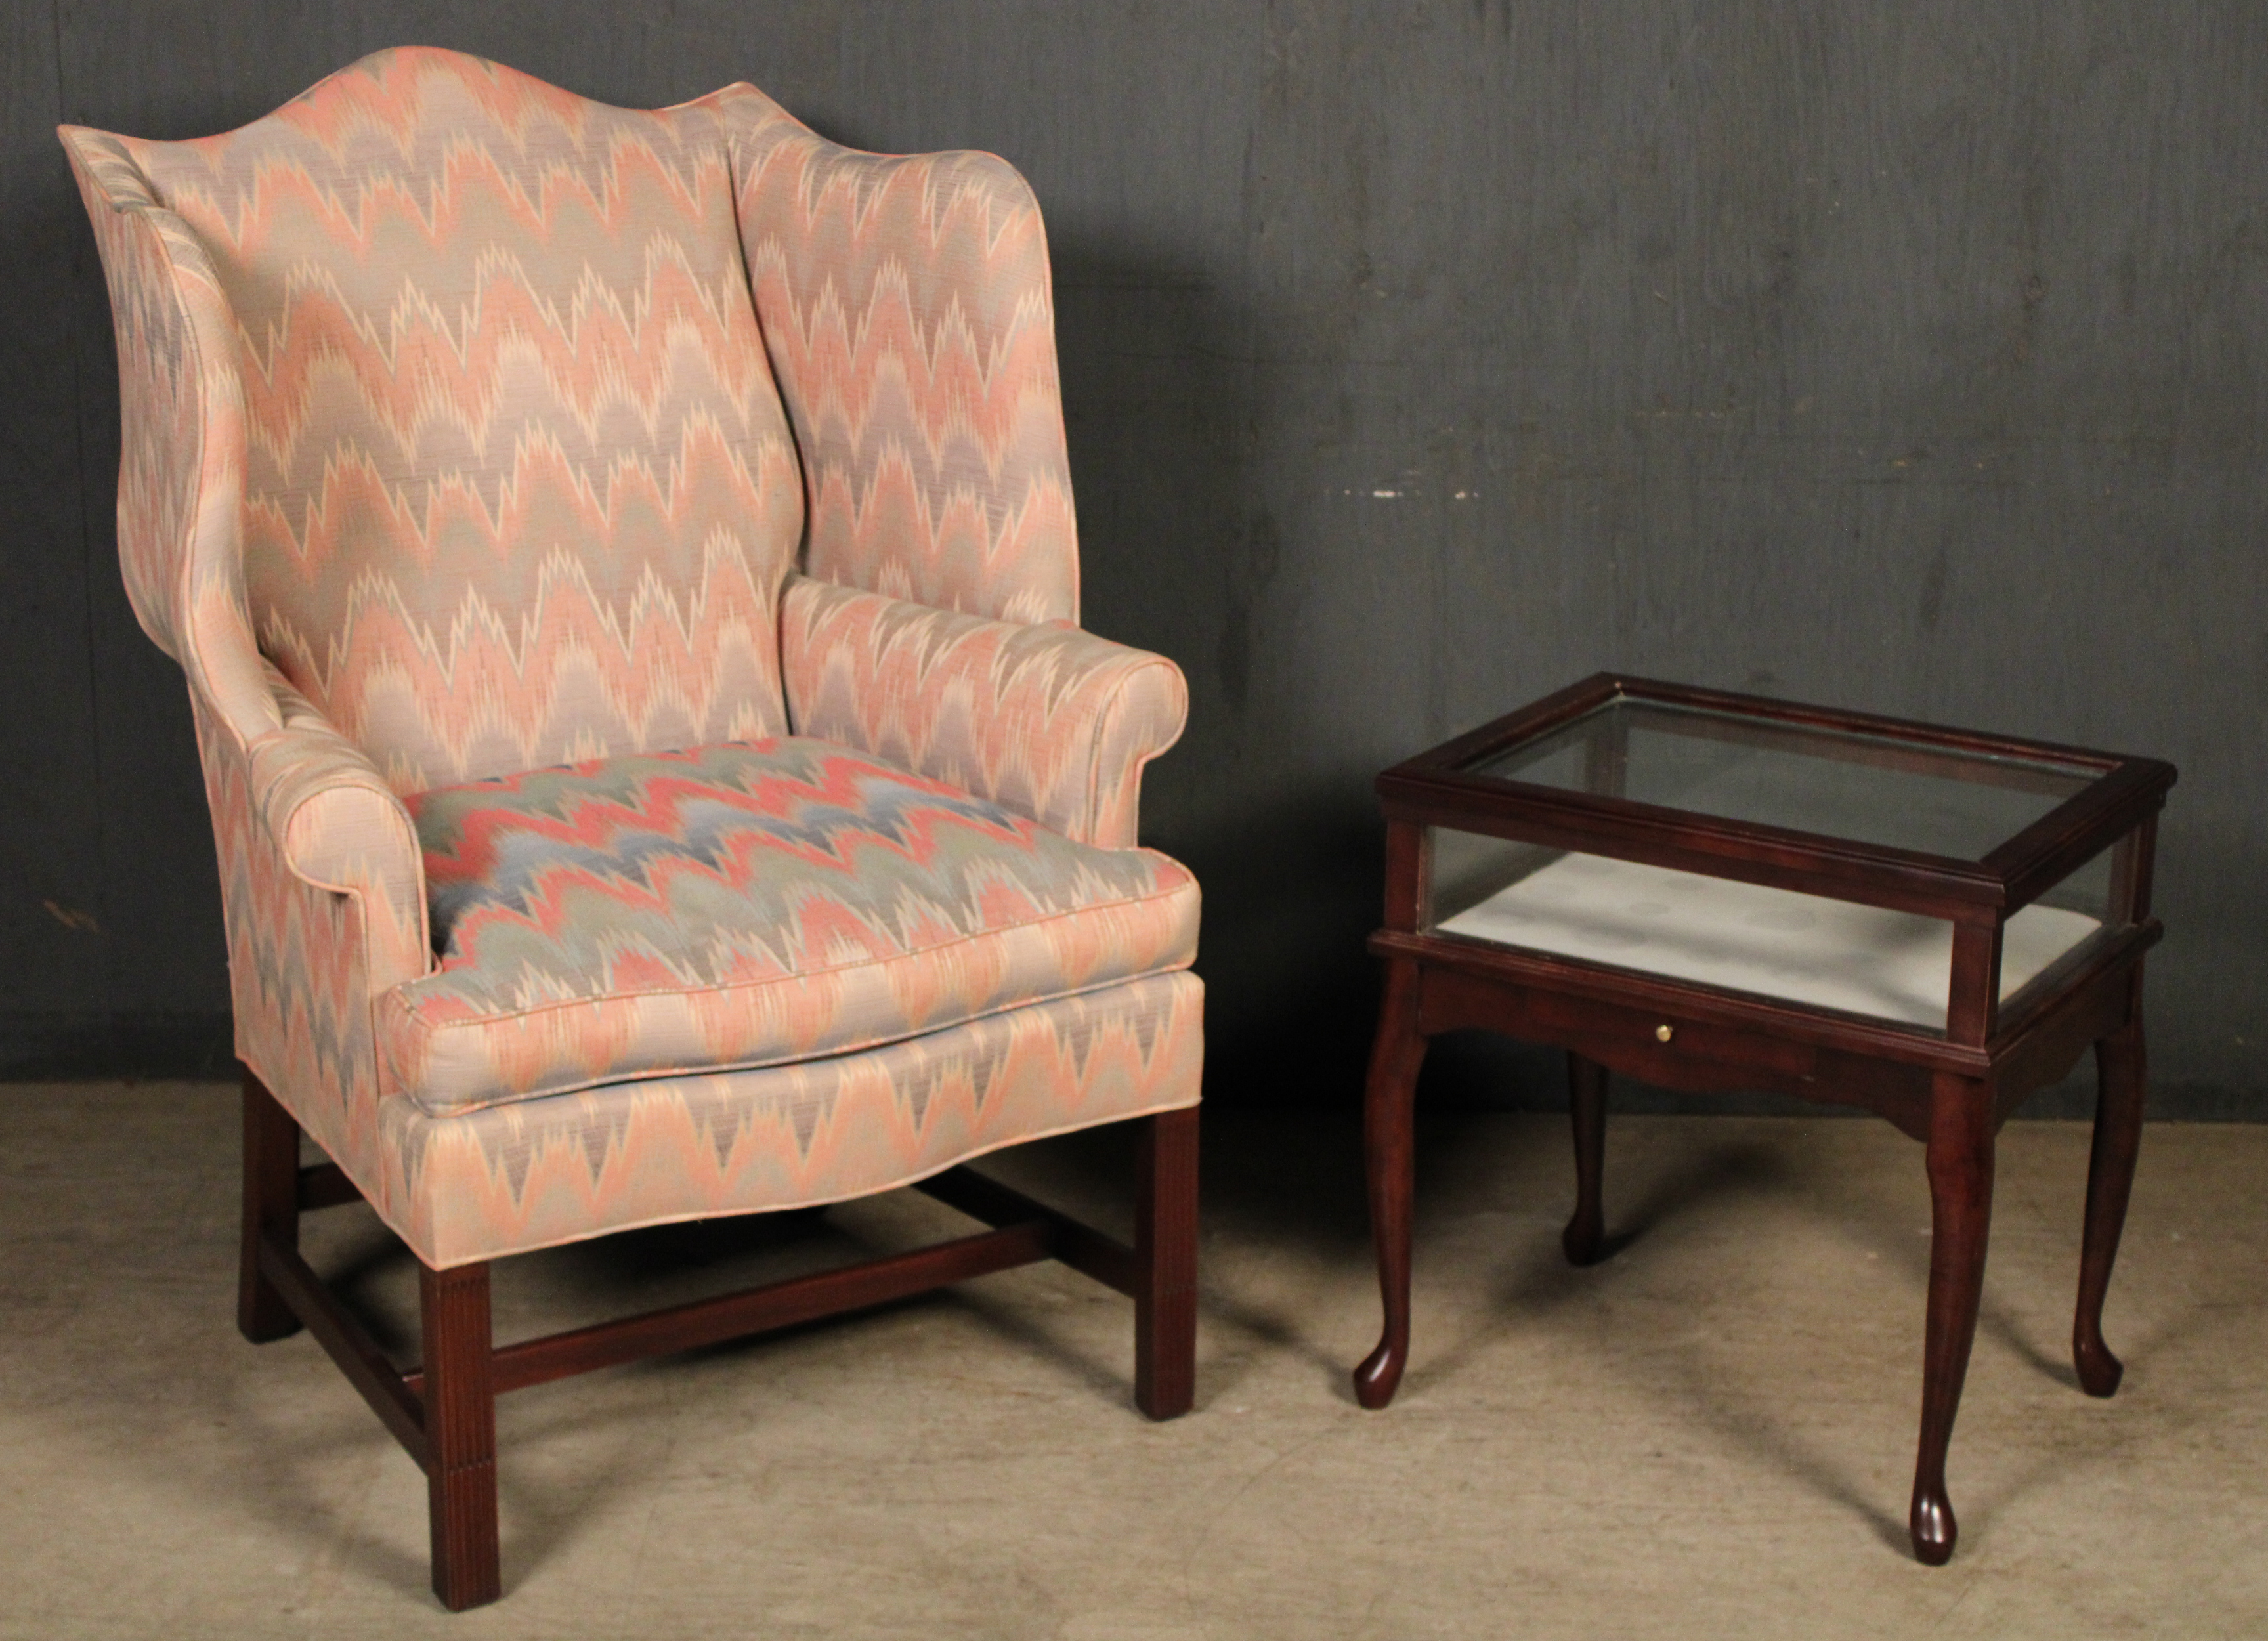 UPHOLSTERED WING CHAIR AND SPECIMEN 35fcca